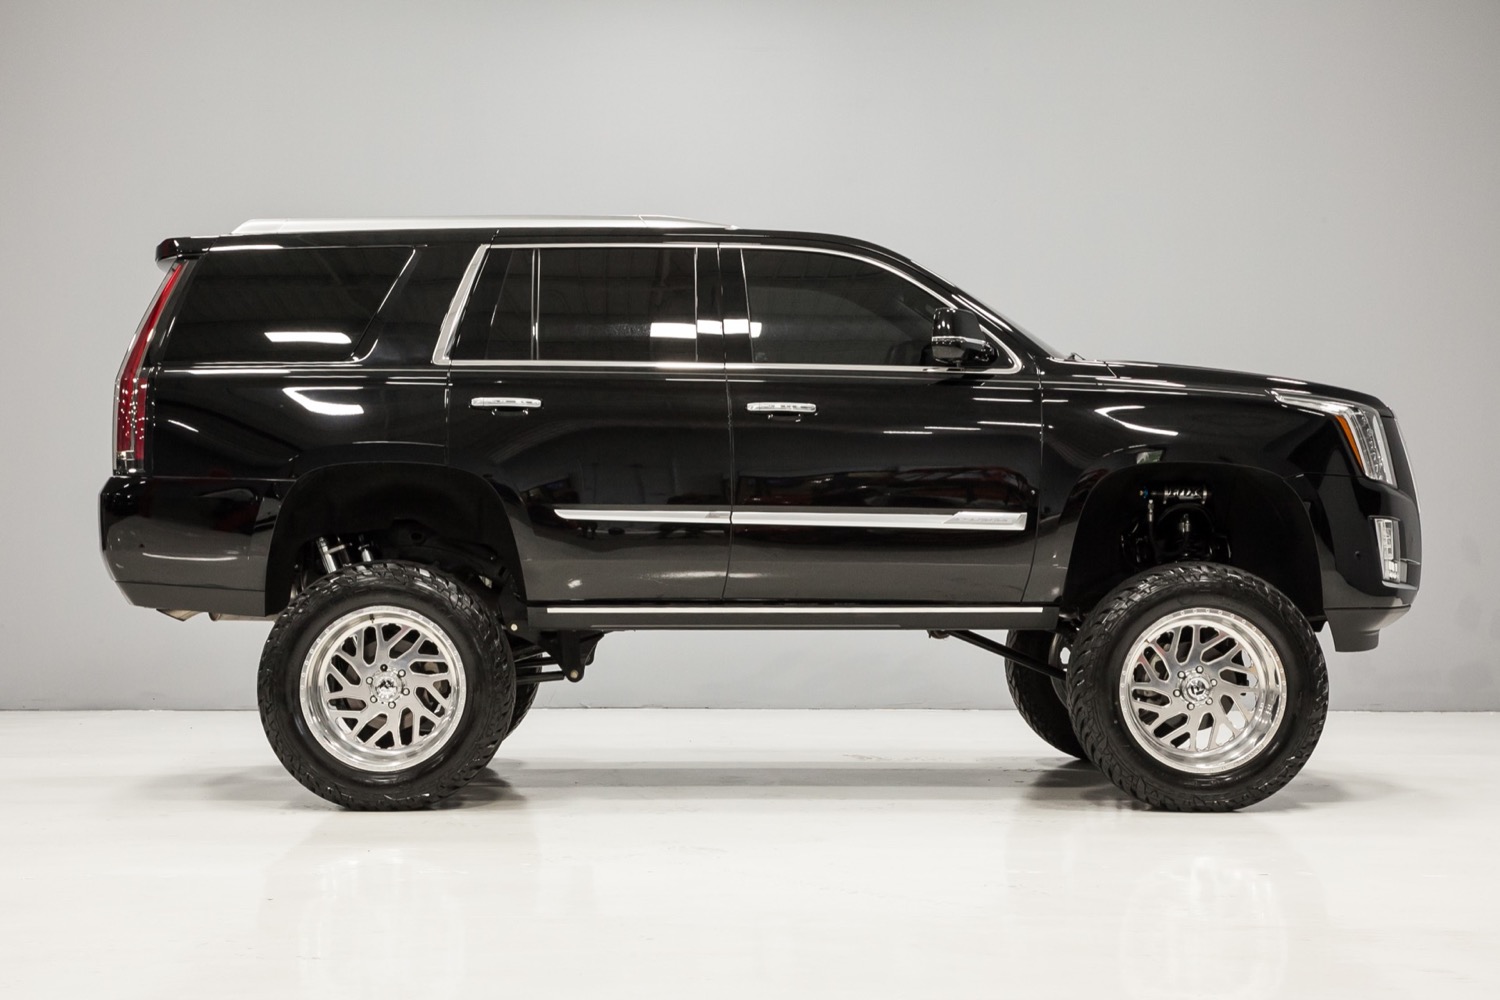 Lifted Cadillac Escalade Makes 750 Supercharged Horsepower.